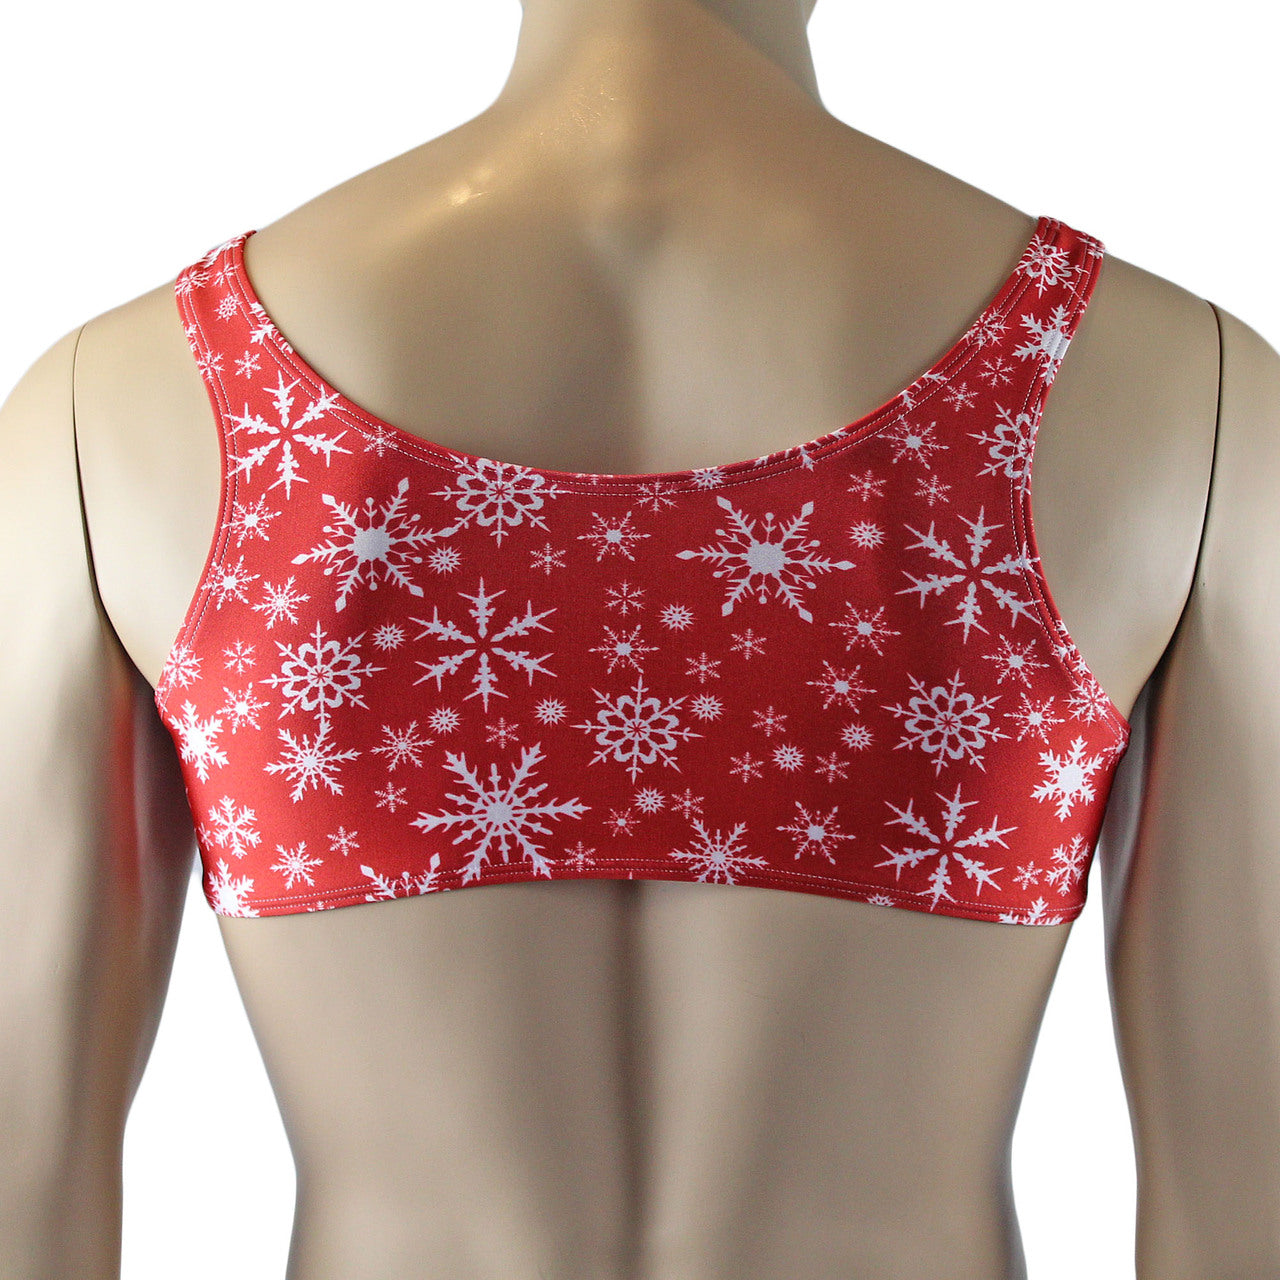 Mens Lingerie Snowflake Print Spandex Bra Top Red and White